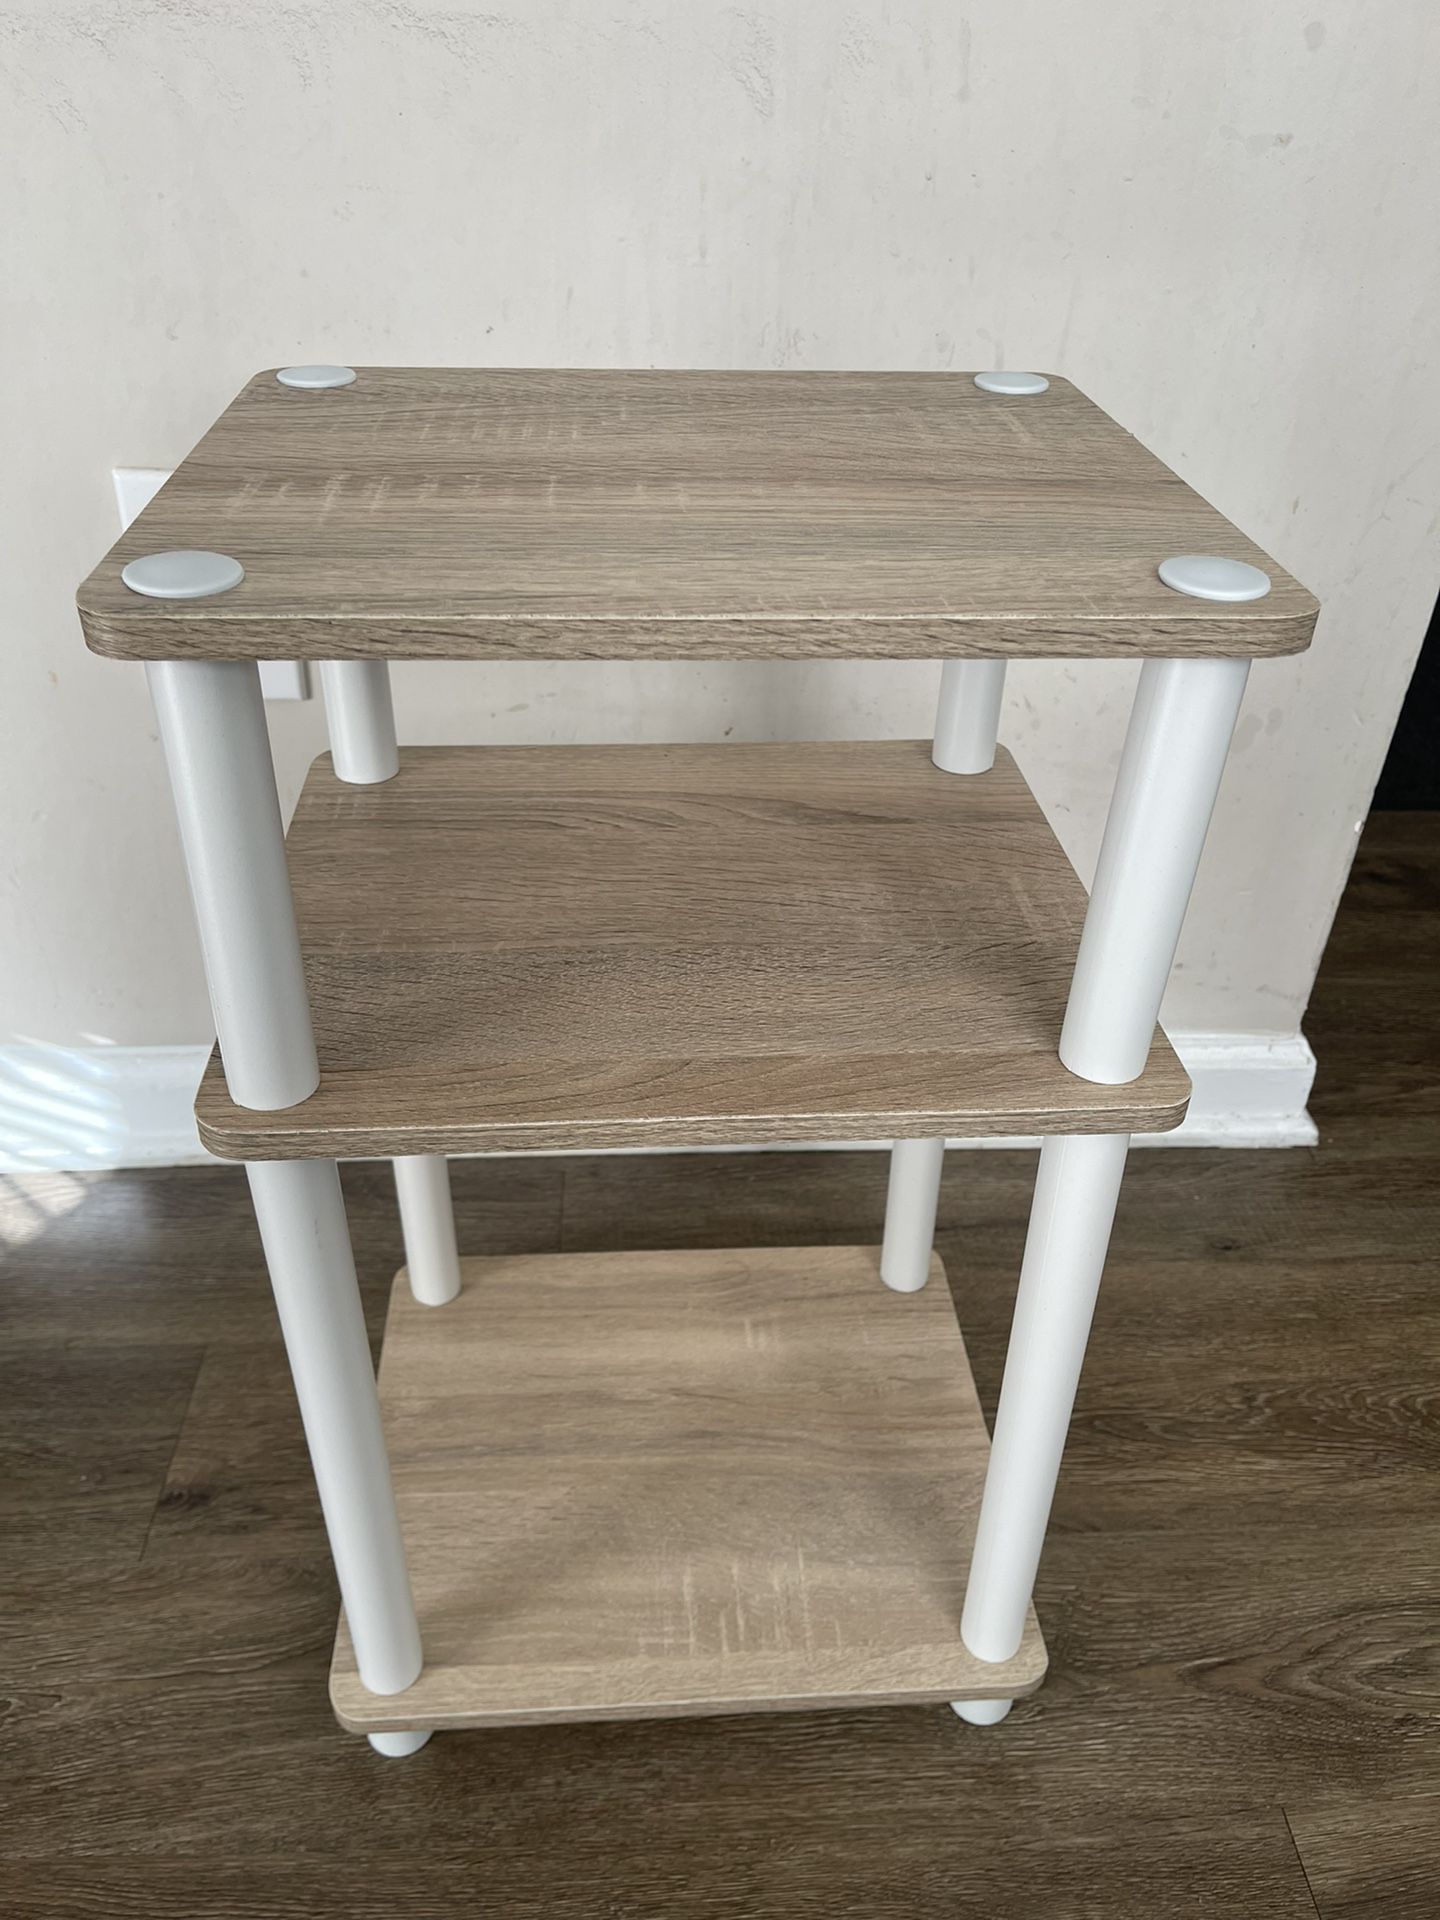 3 Tier End Table